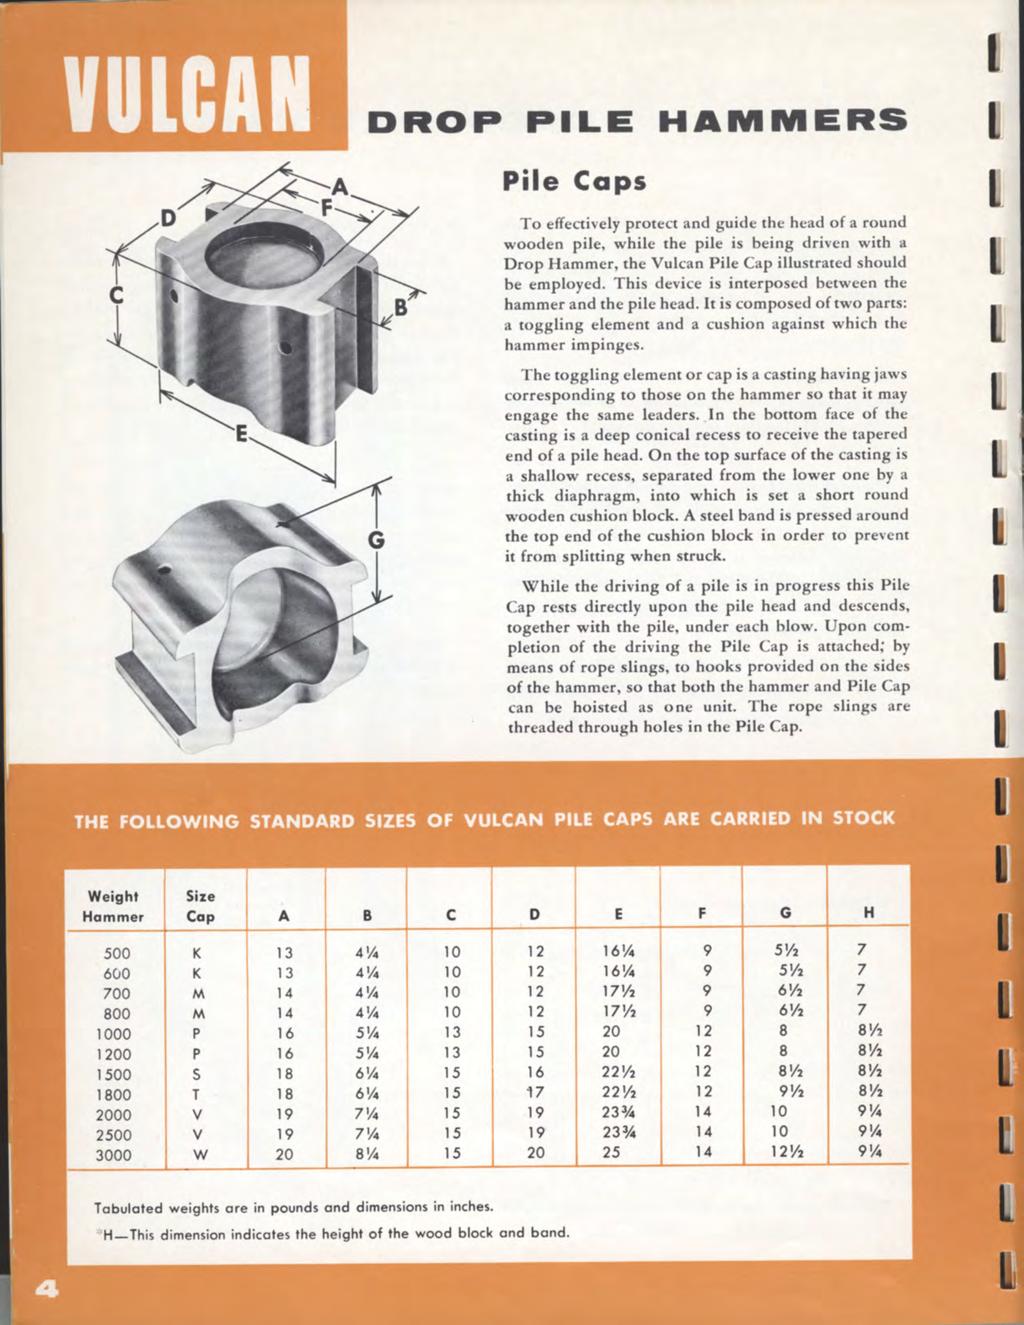 DROP FILE HAIVIIVIERS Pile Caps To effectively protect and guide the head of a round wooden pile, while the pile is being driven with a Drop Hammer, the Vulcan Pile Cap illustrated should be employed.